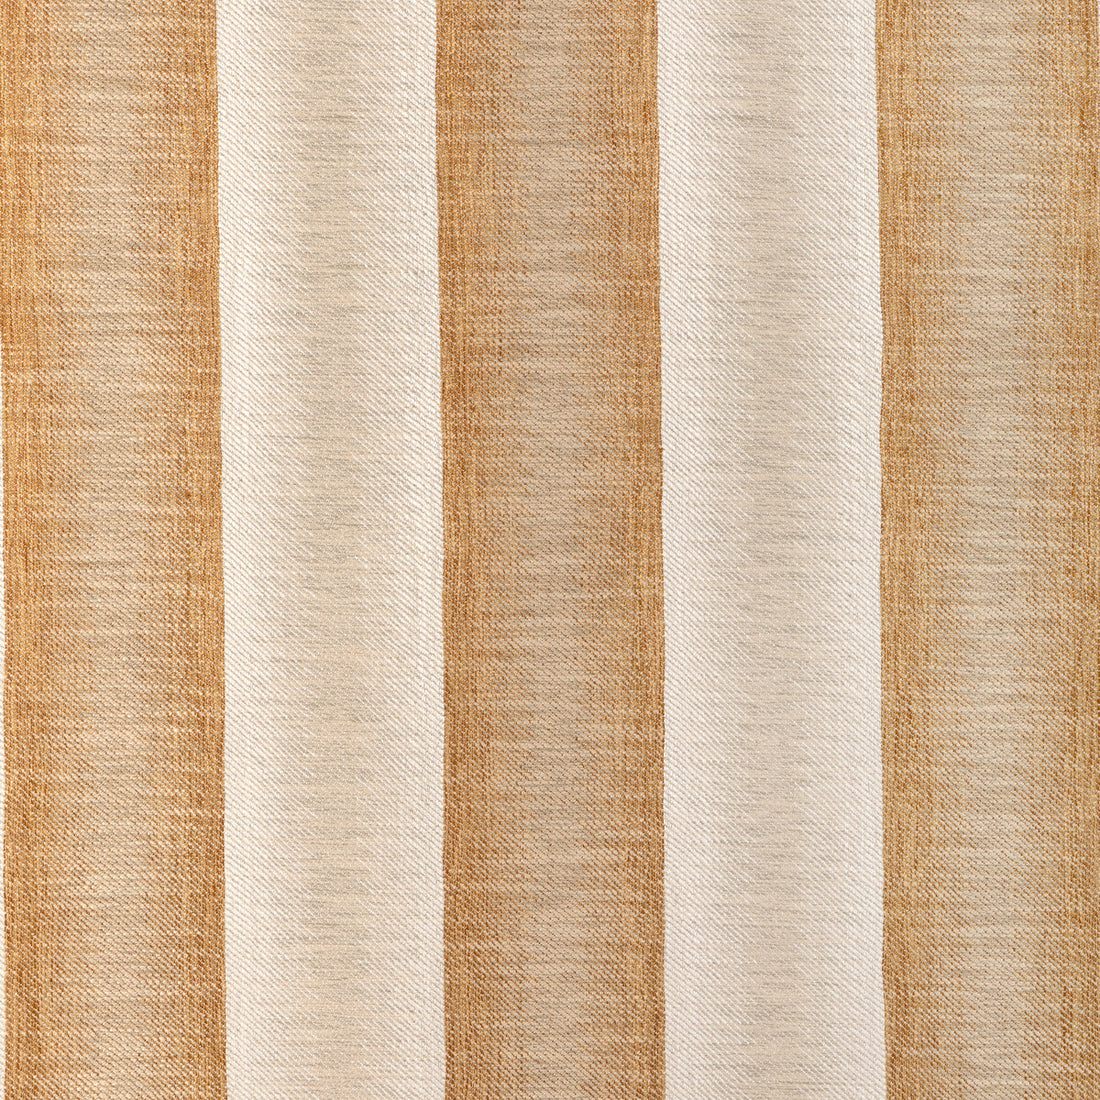 Kravet Design fabric in 37118-12 color - pattern 37118.12.0 - by Kravet Design in the Woven Colors collection